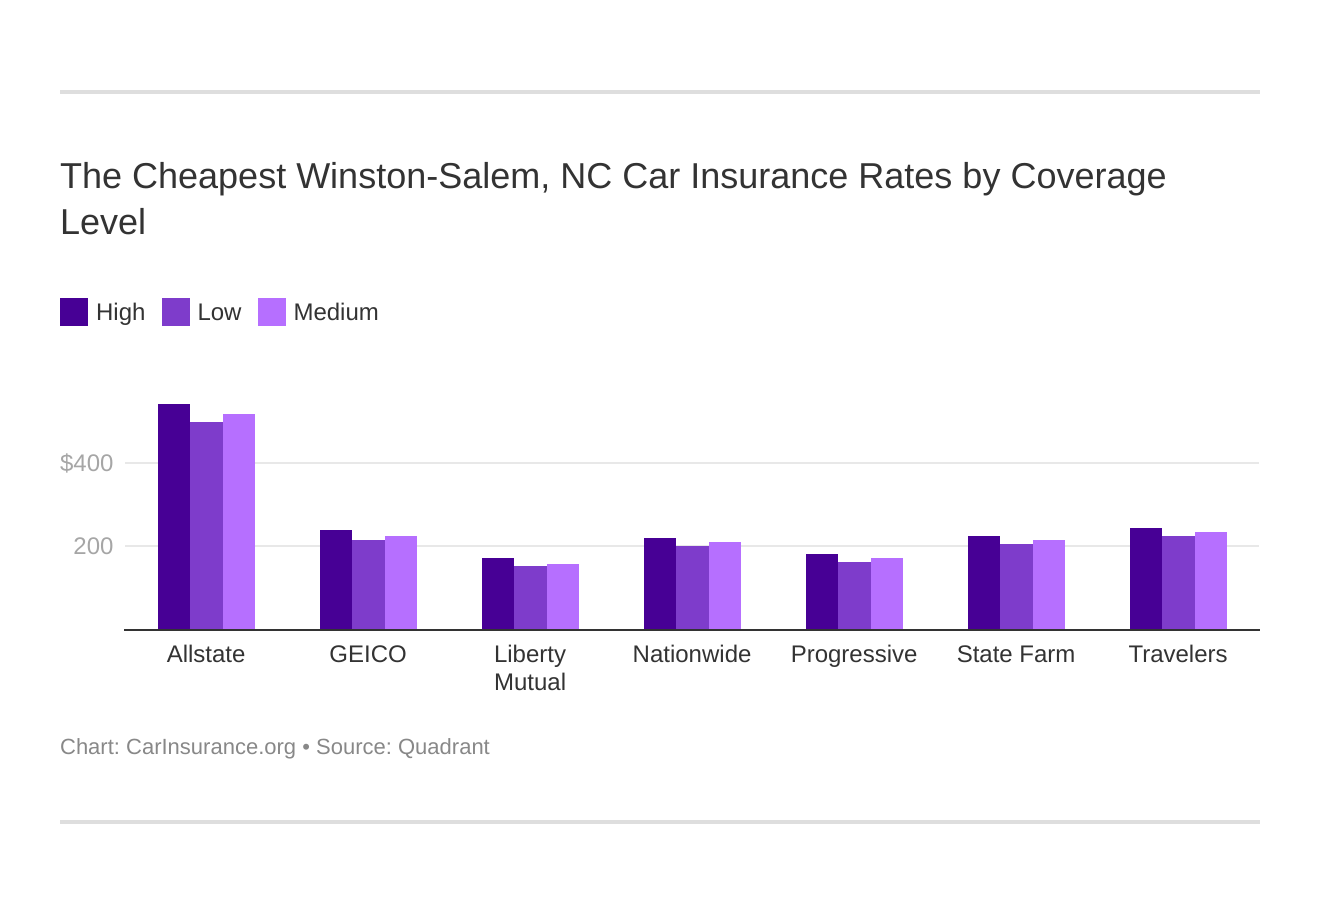 The Cheapest Winston-Salem, NC Car Insurance Rates by Coverage Level